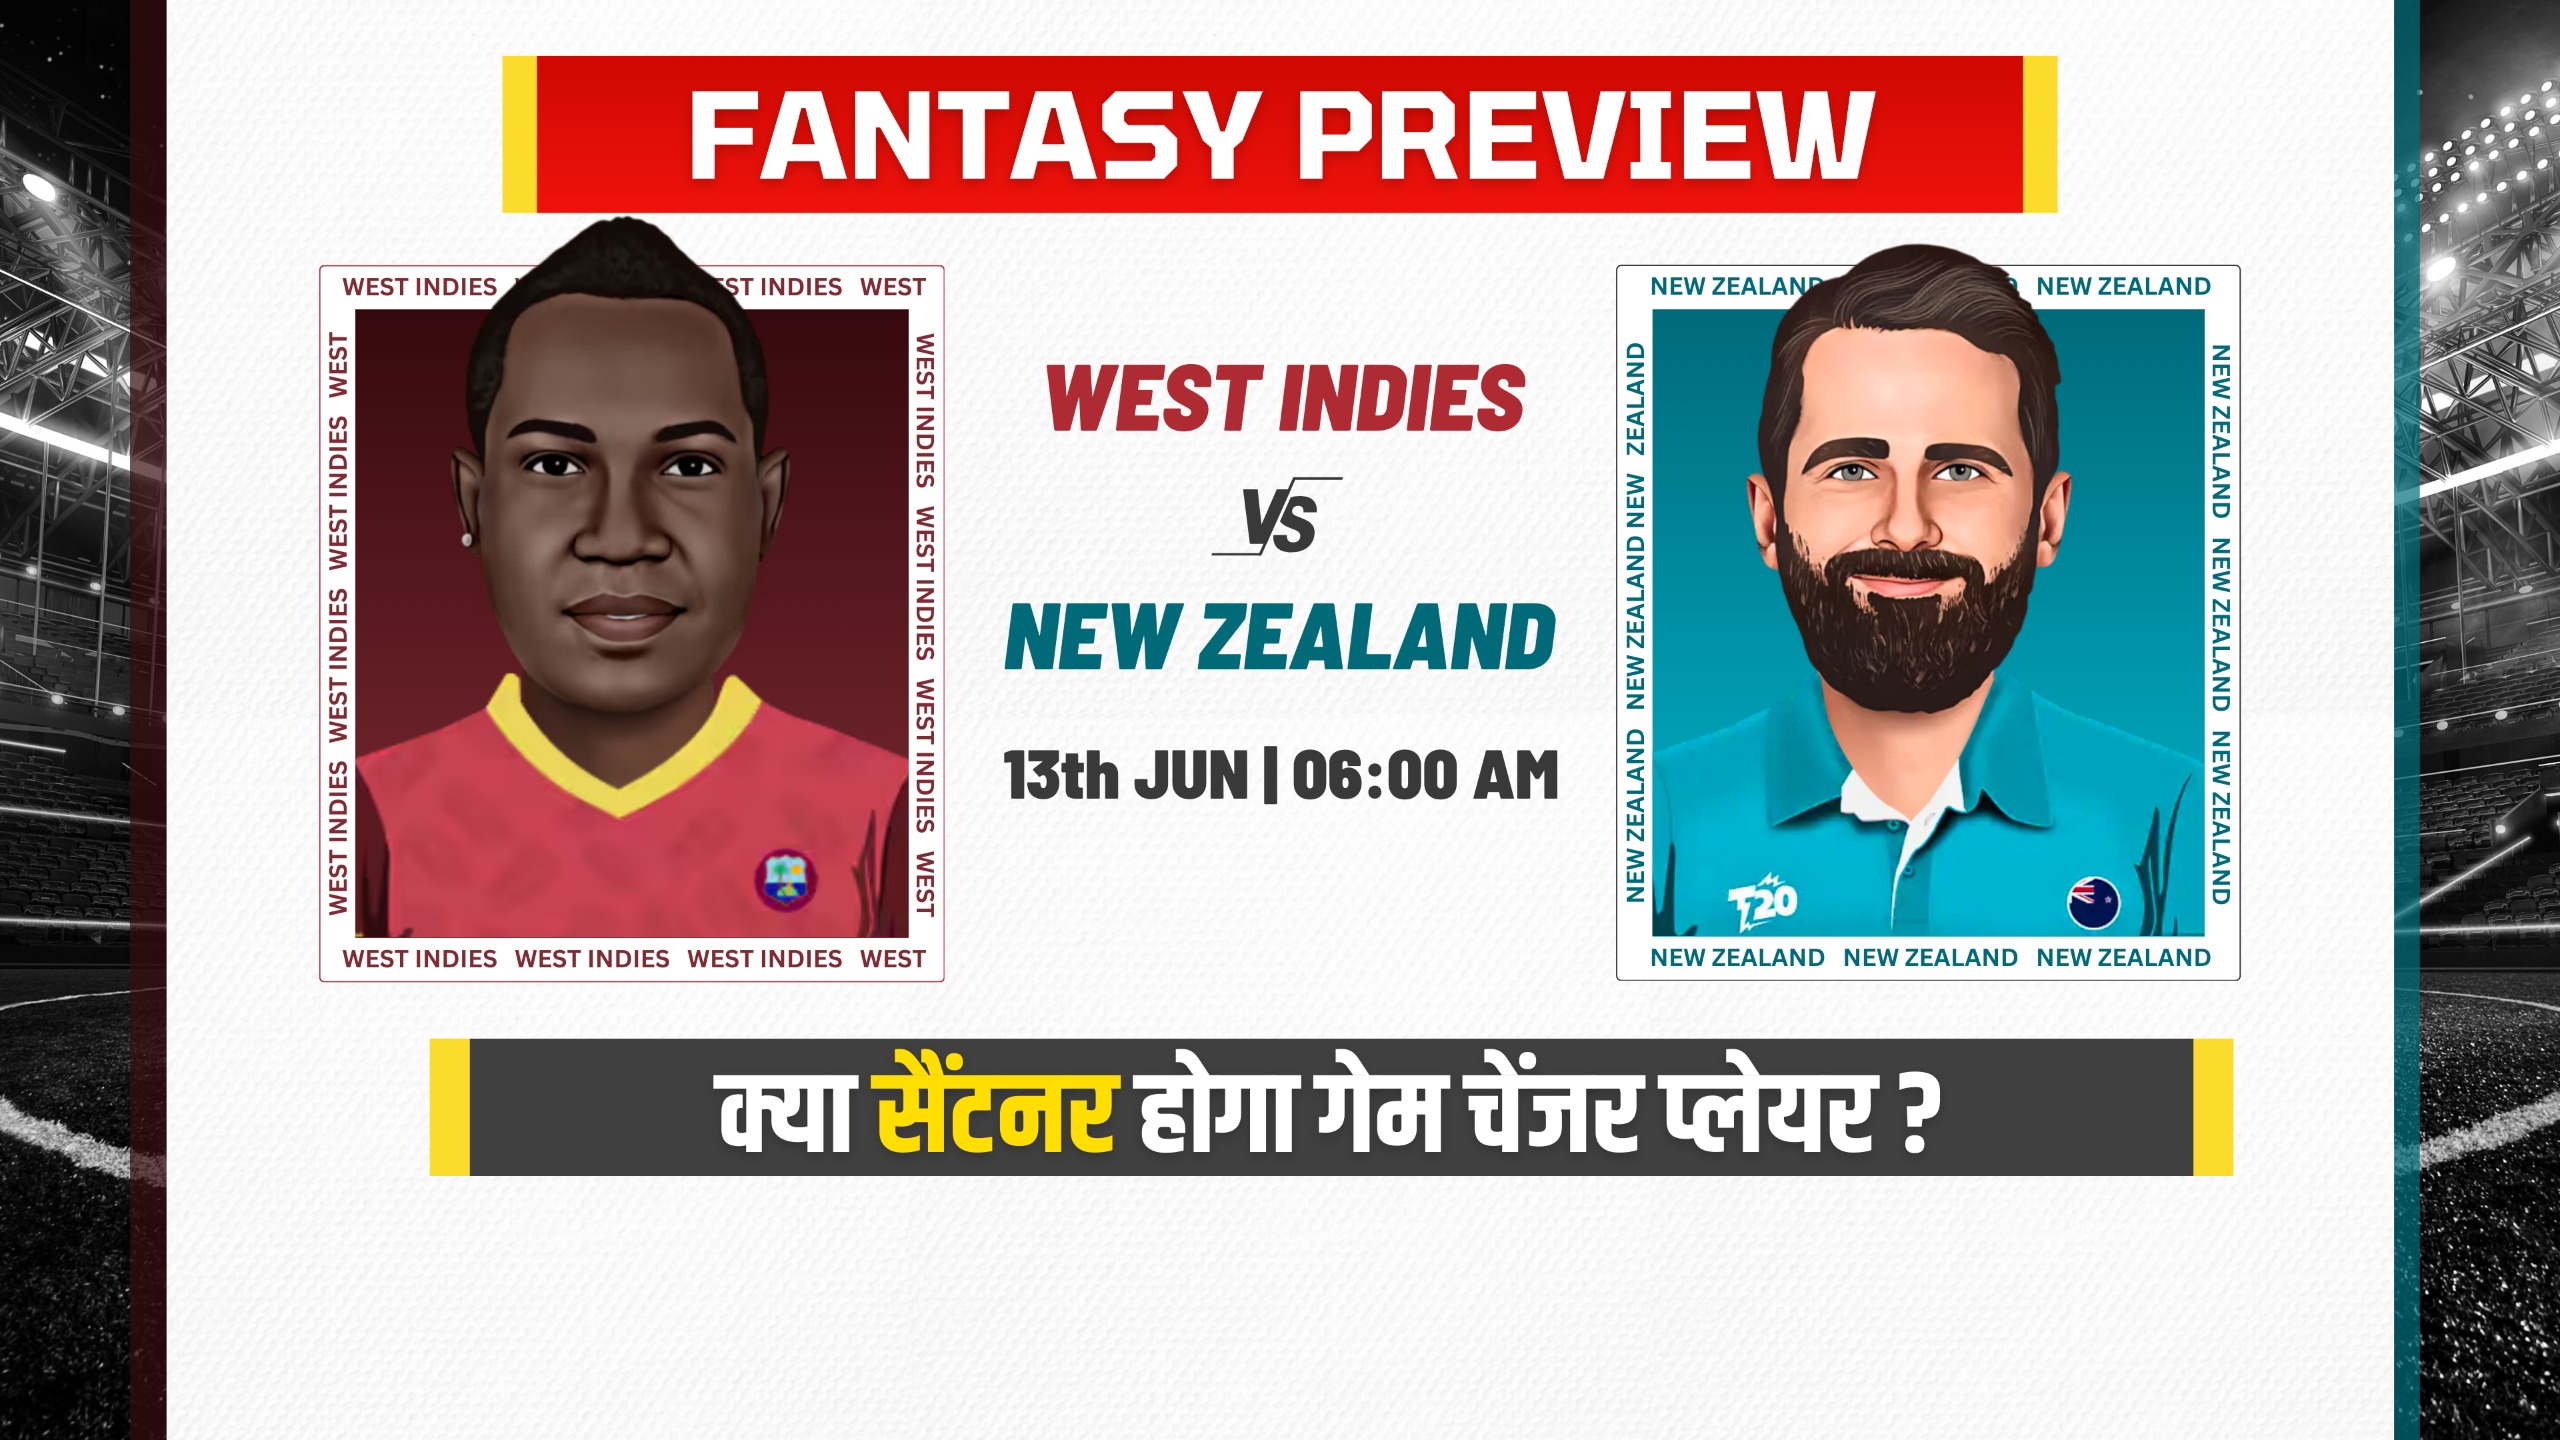 Match 26: West Indies vs New Zealand | Fantasy Preview